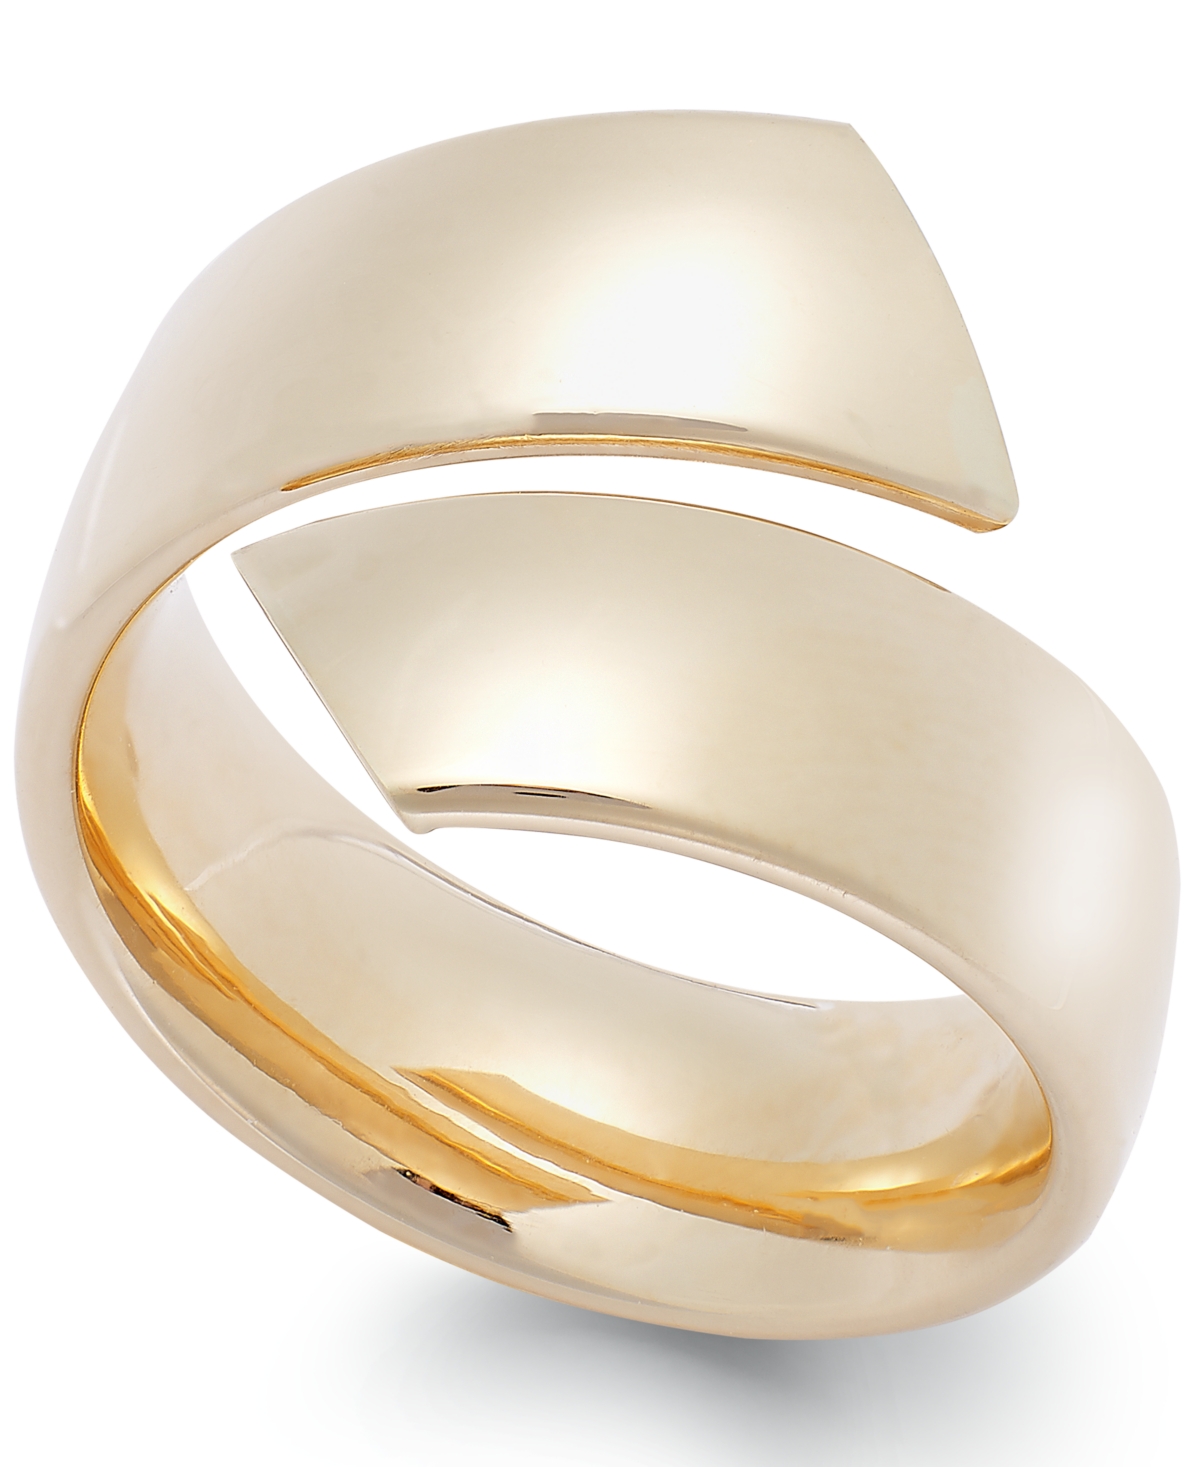 Bypass Ring in 14k Yellow Gold and 14k White Gold - White Gold